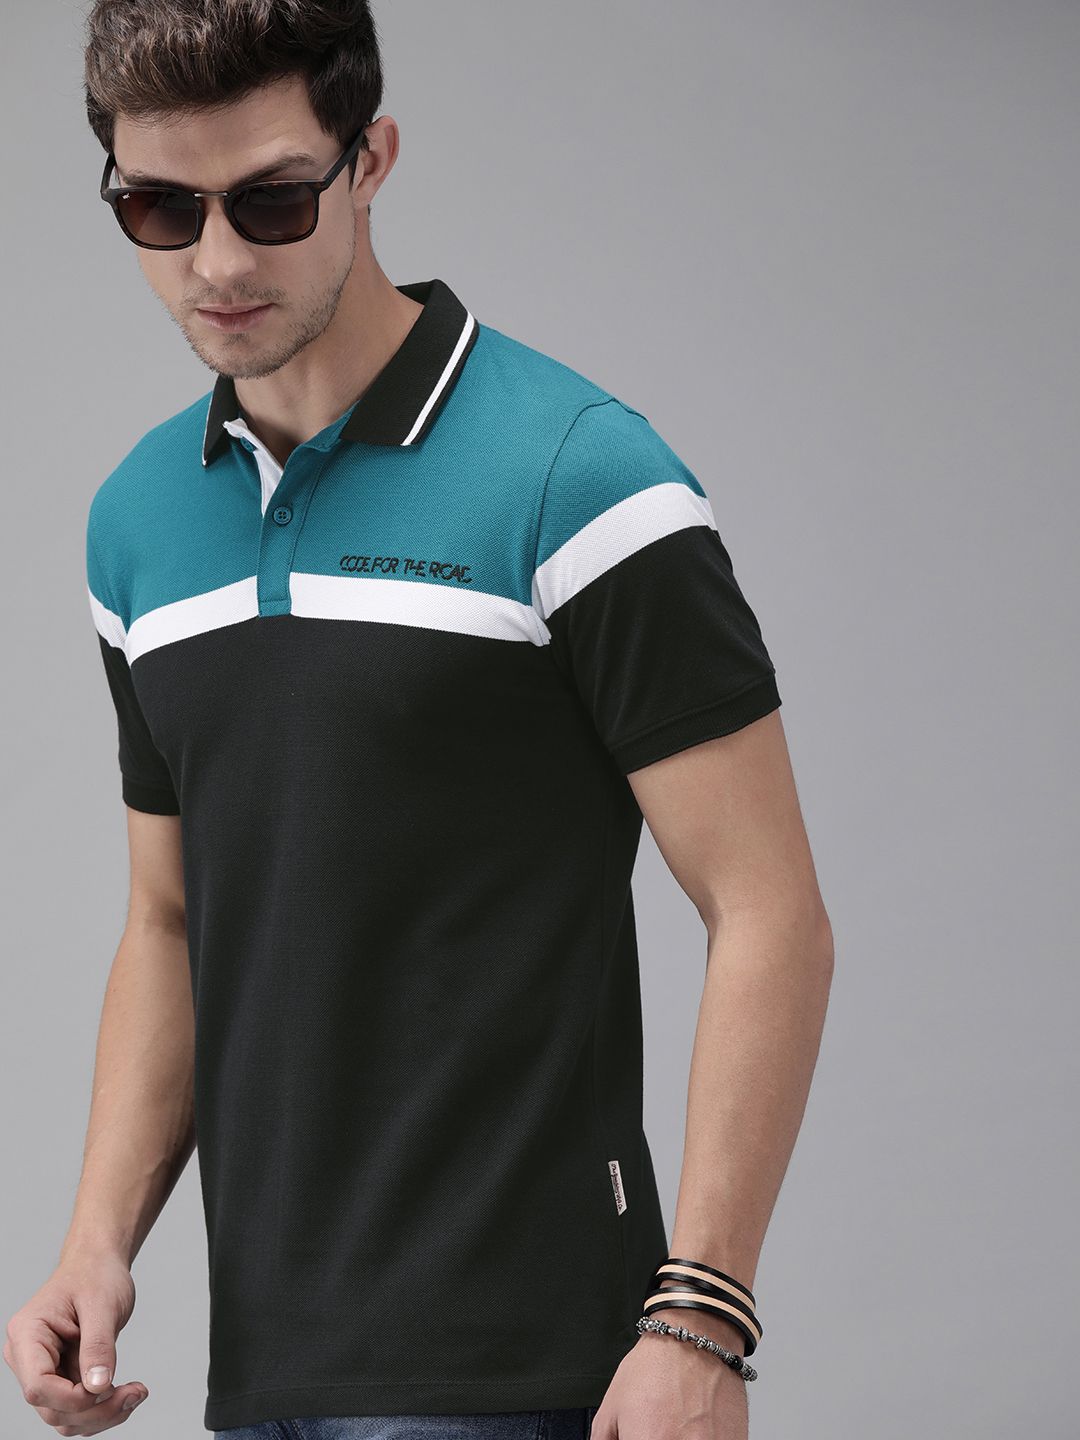 The Roadster Lifestyle Co Men Black  Turquoise Blue Striped Polo Collar Pure Cotton T-shirt